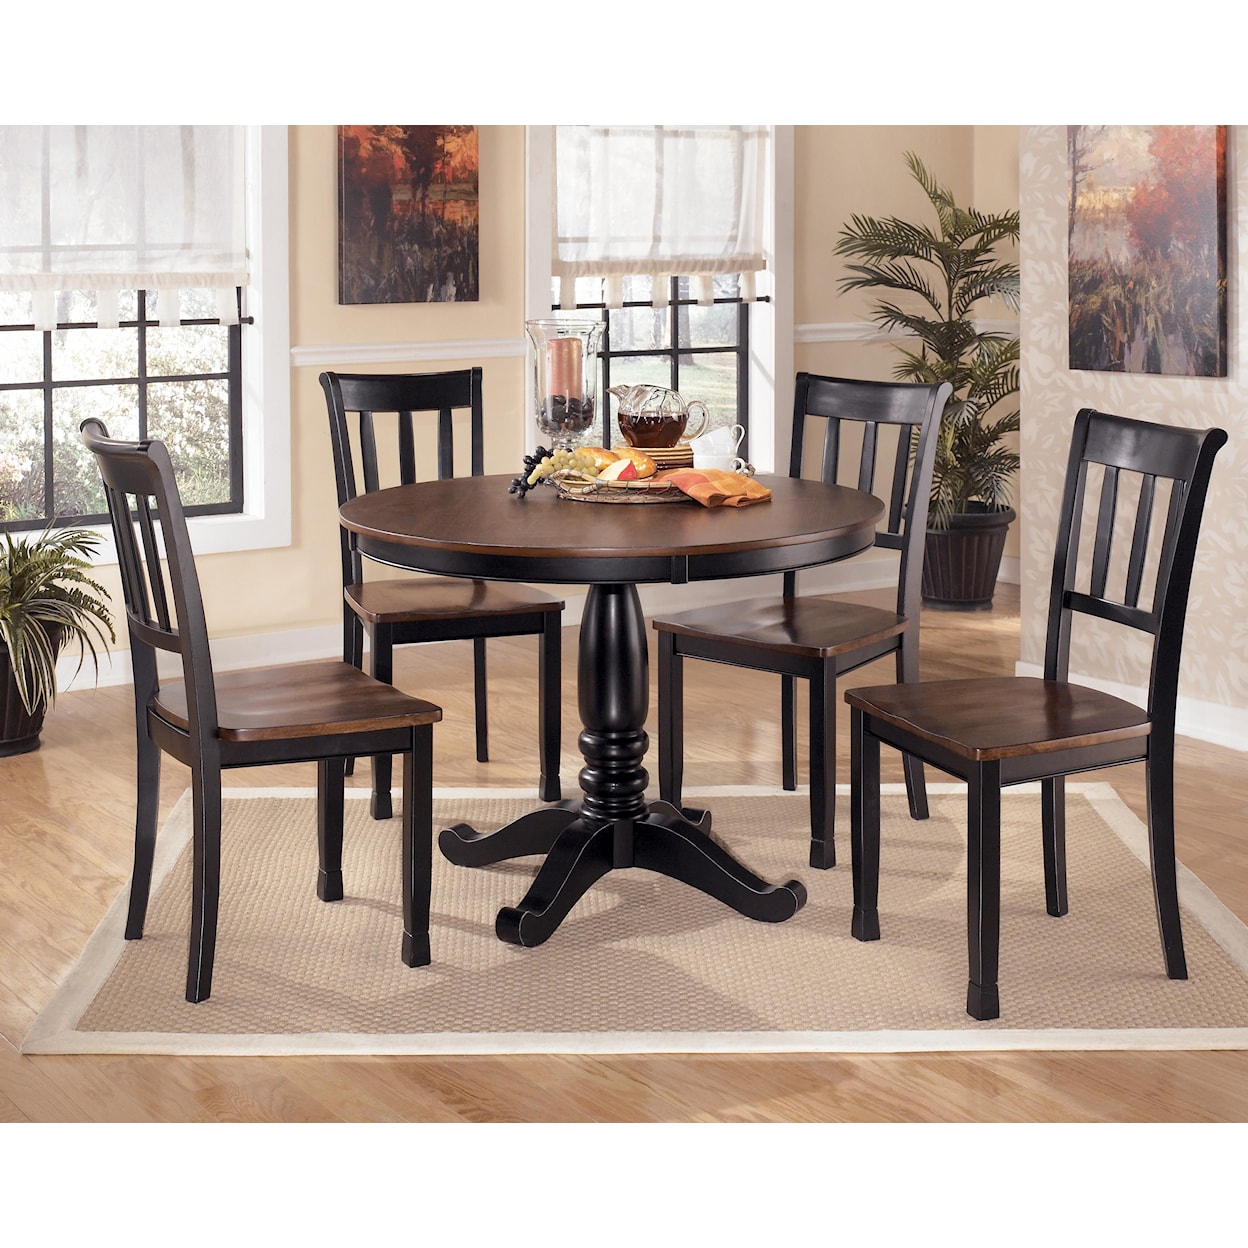 Benchcraft Owingsville Dining Room Side Chair